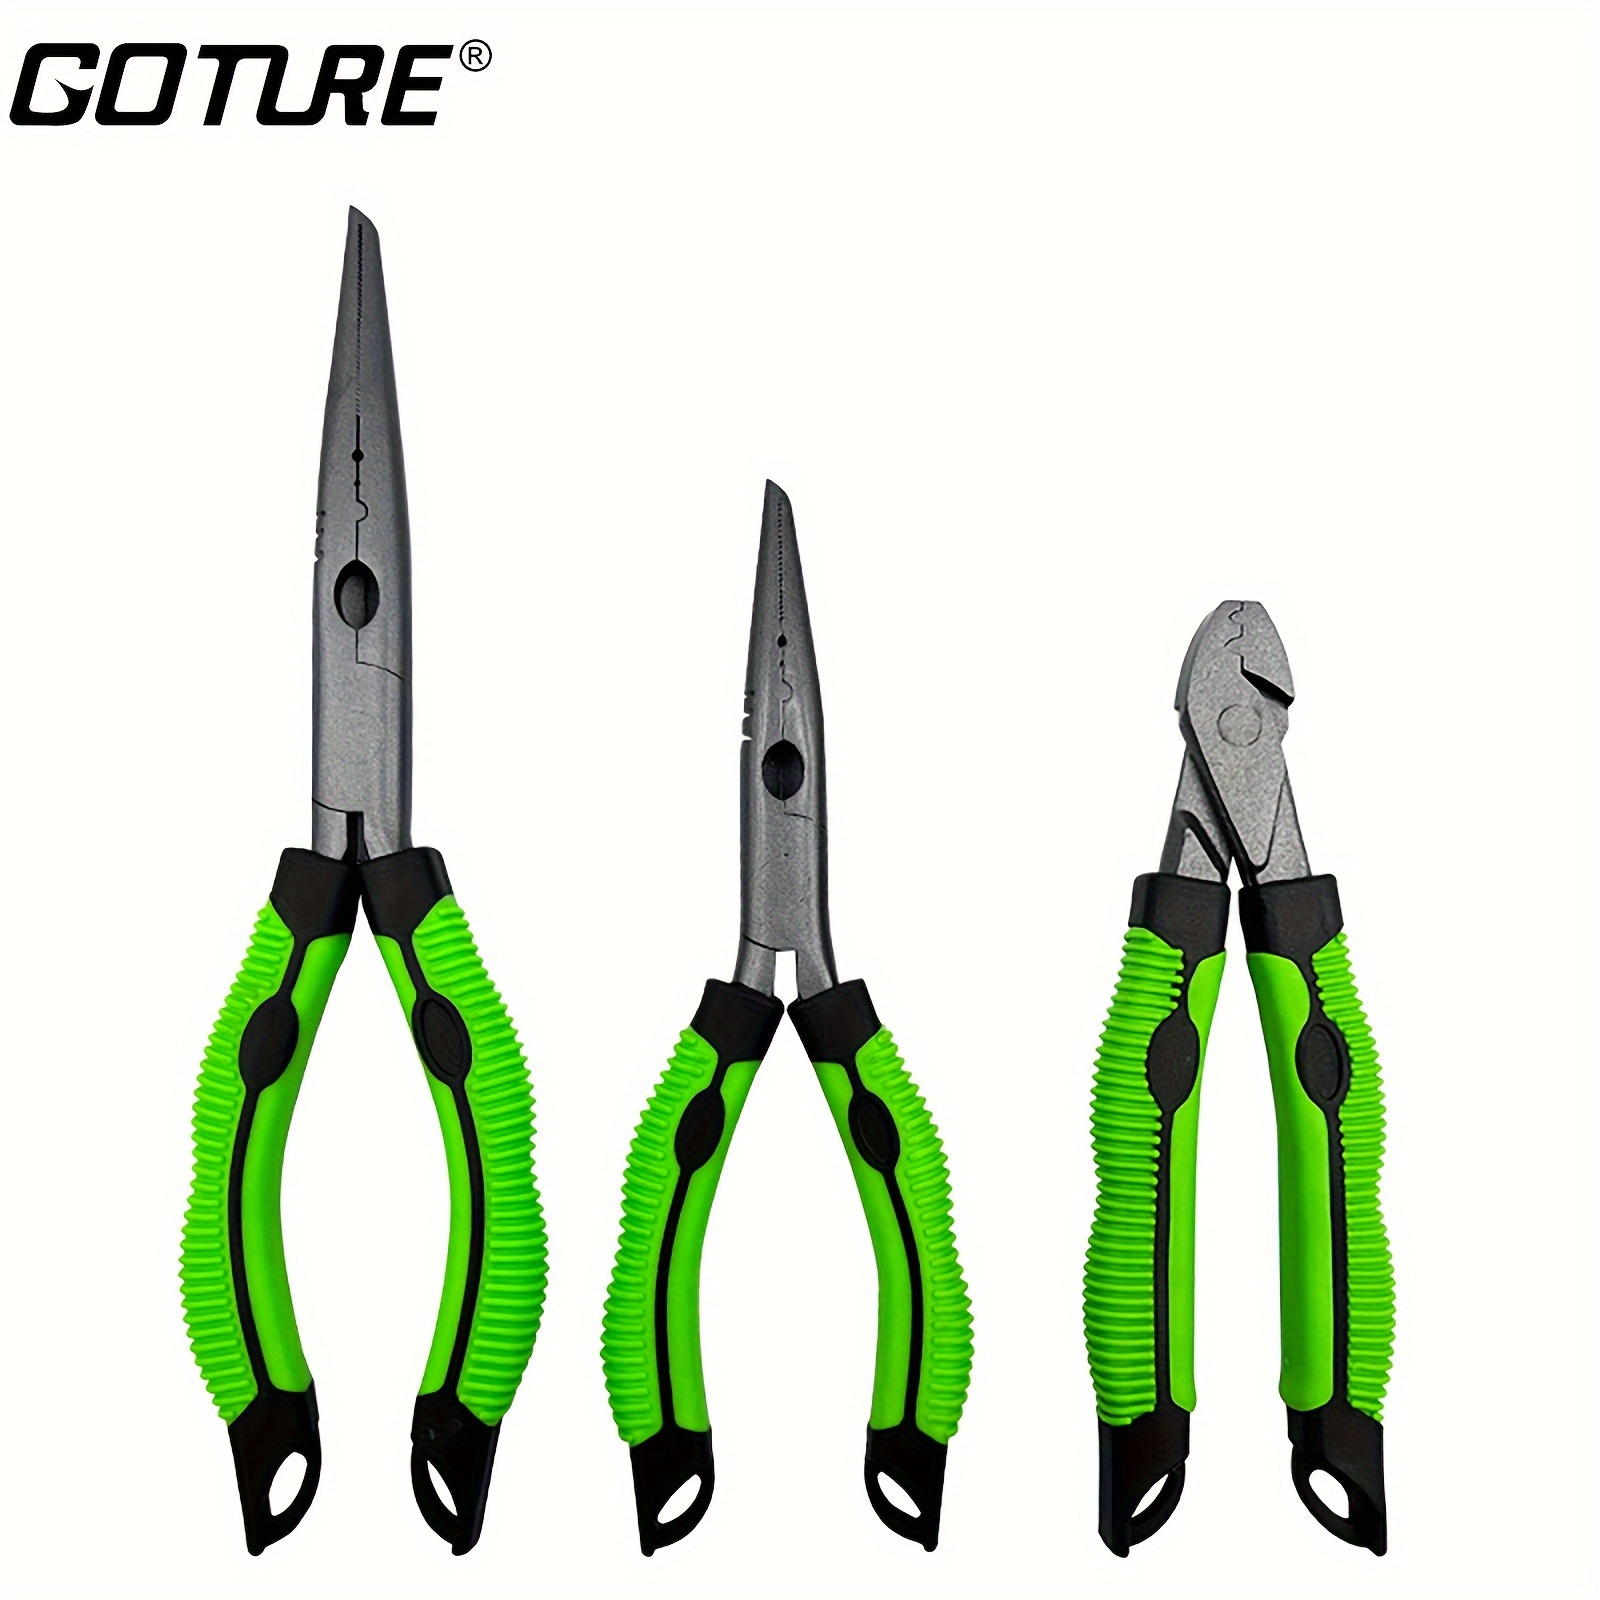 Goture Fishing Pliers Saltwater 7 in,4Cr13 Hard Stainless Steel